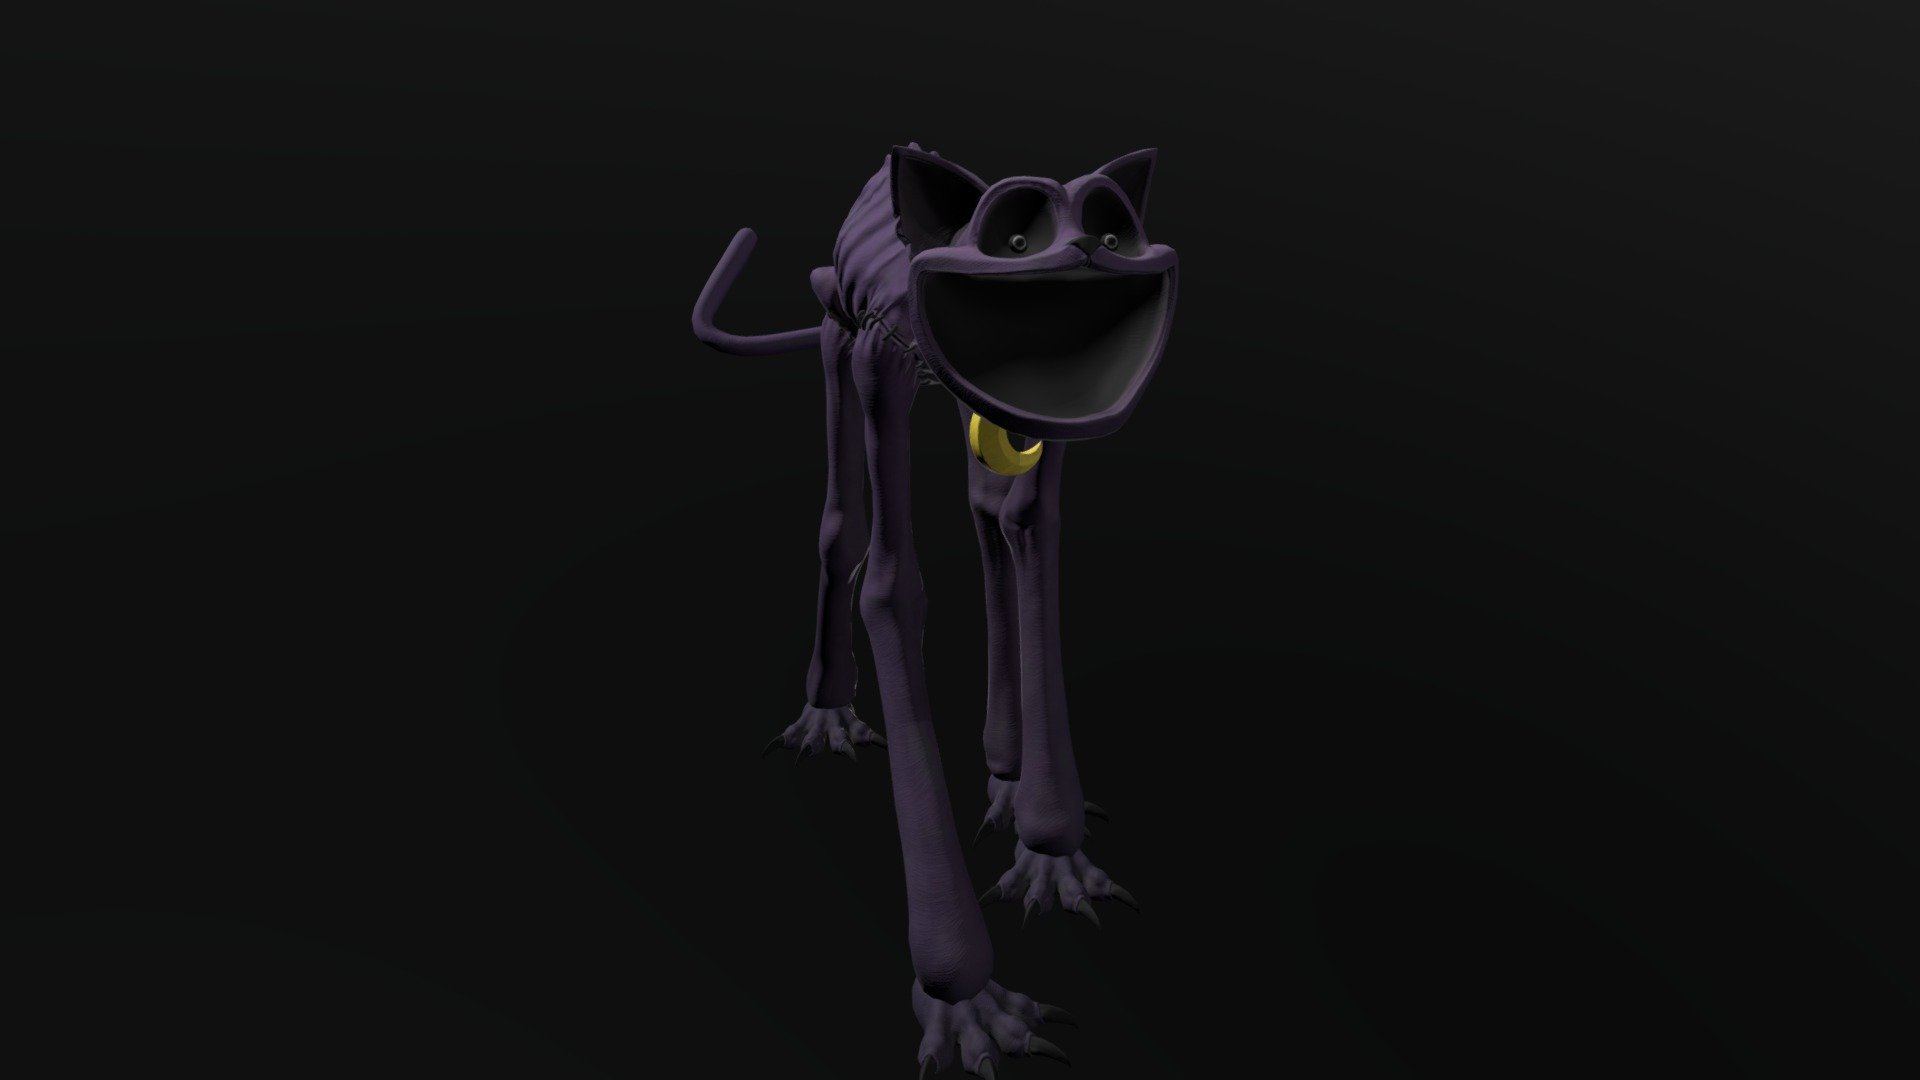 This is CatNap from Poppy Playtime Chapter 3. I did not make this model 3d model